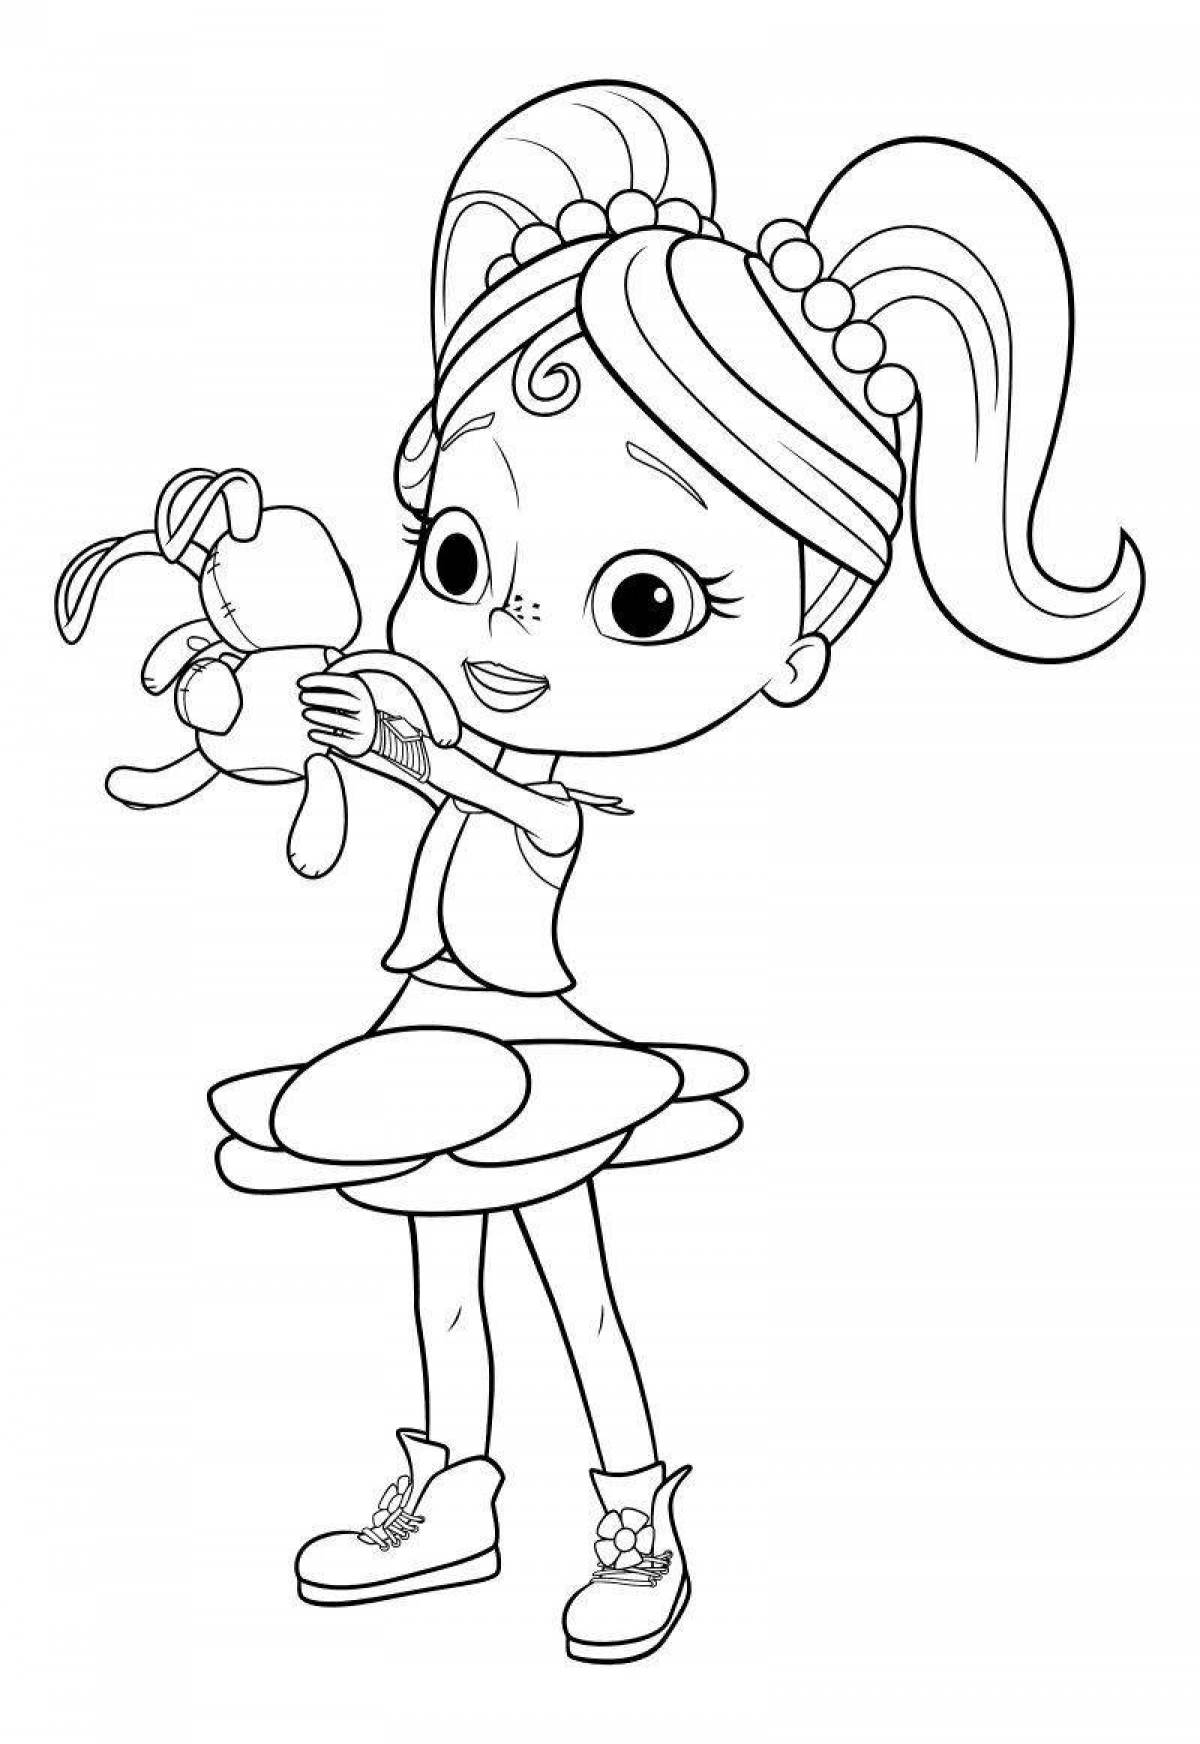 Colorful fairy coloring pages for kids